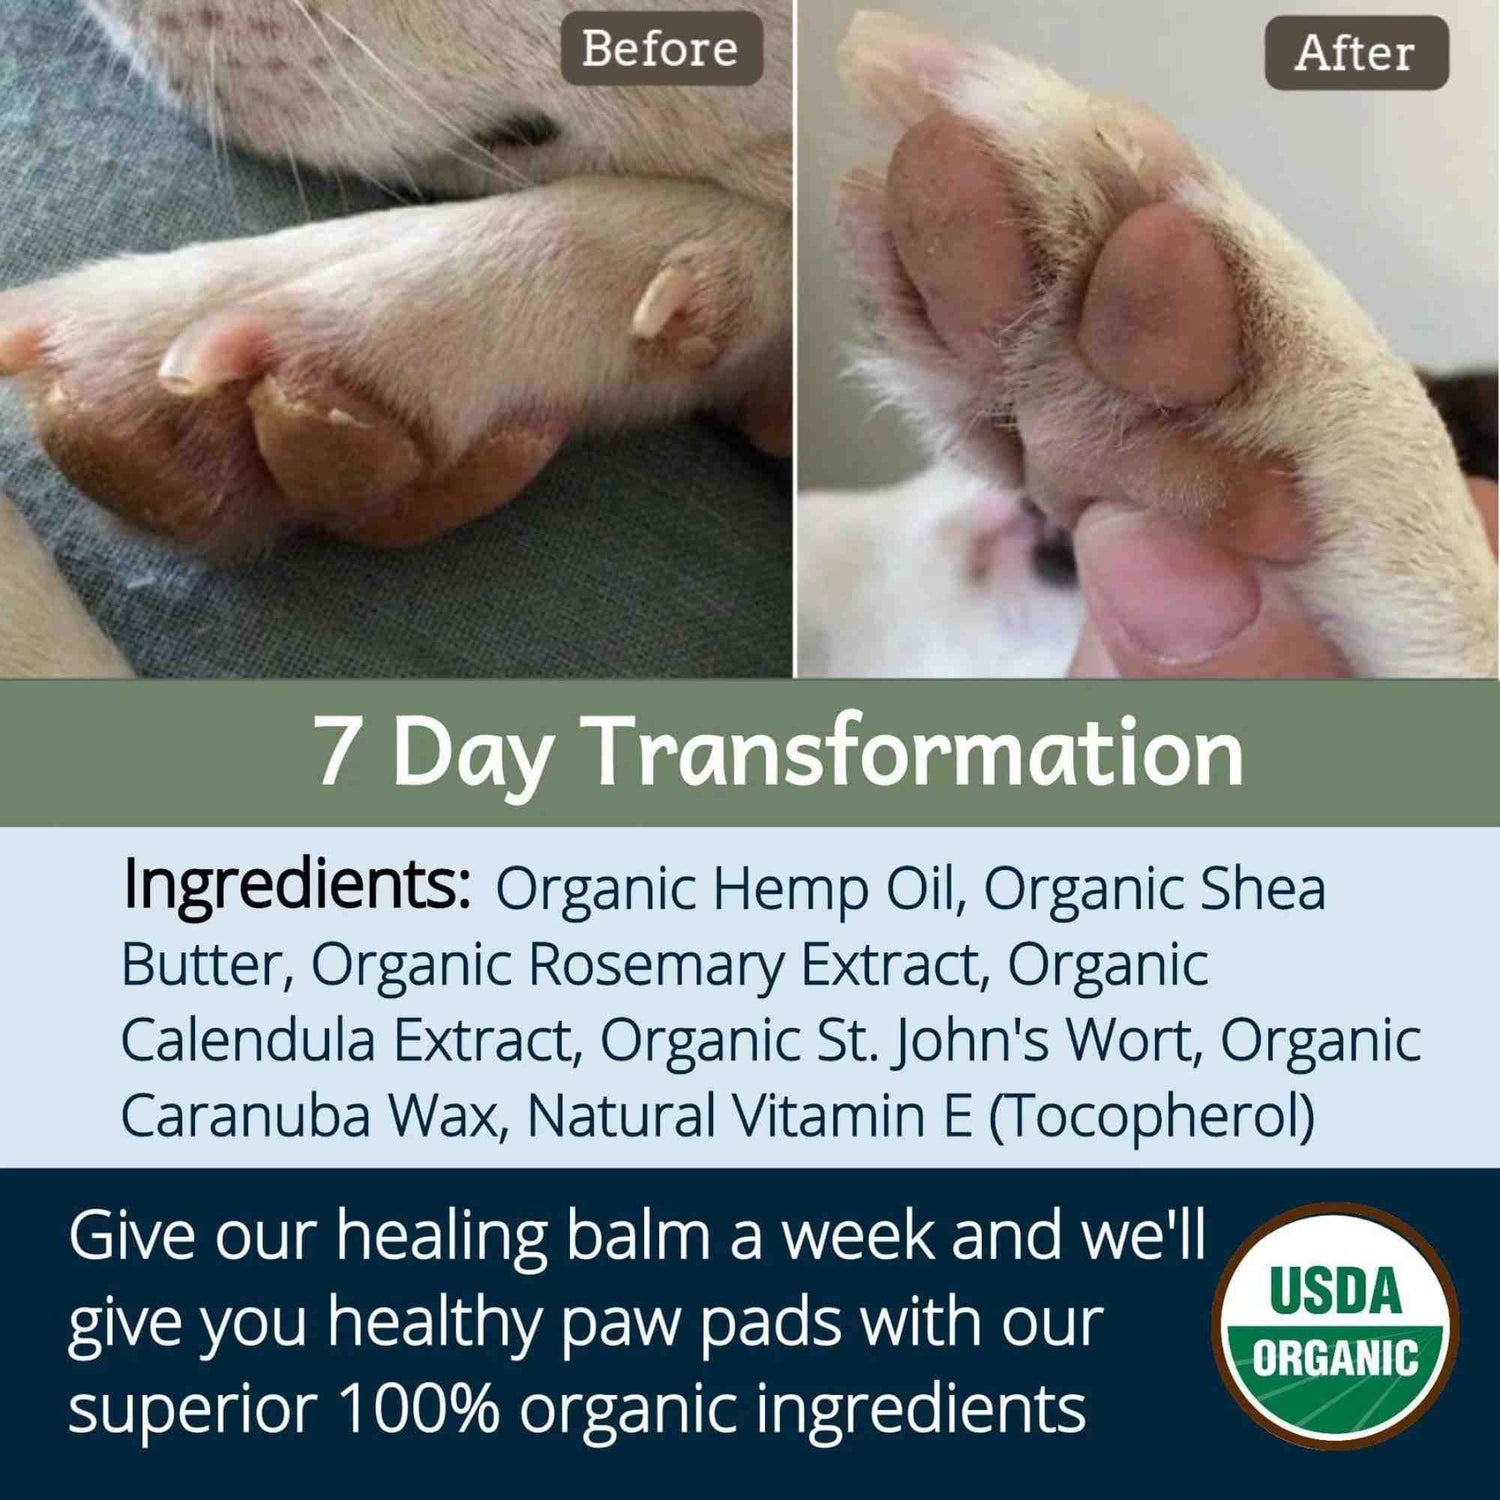 4-legger healing balm usda certified organic healing balm for dog nose and paw pads ingredients and 7 day transformation